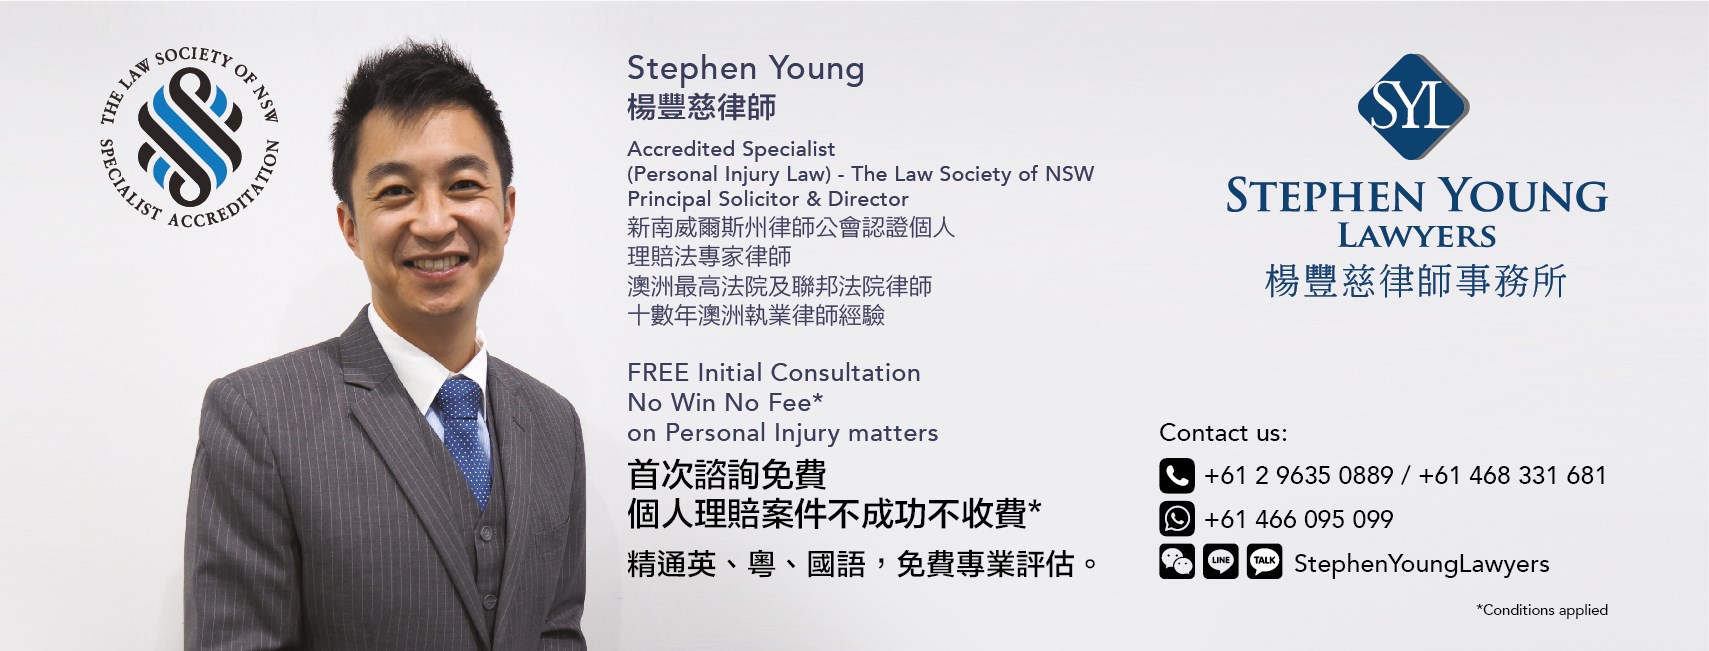 Stephen Young Lawyers